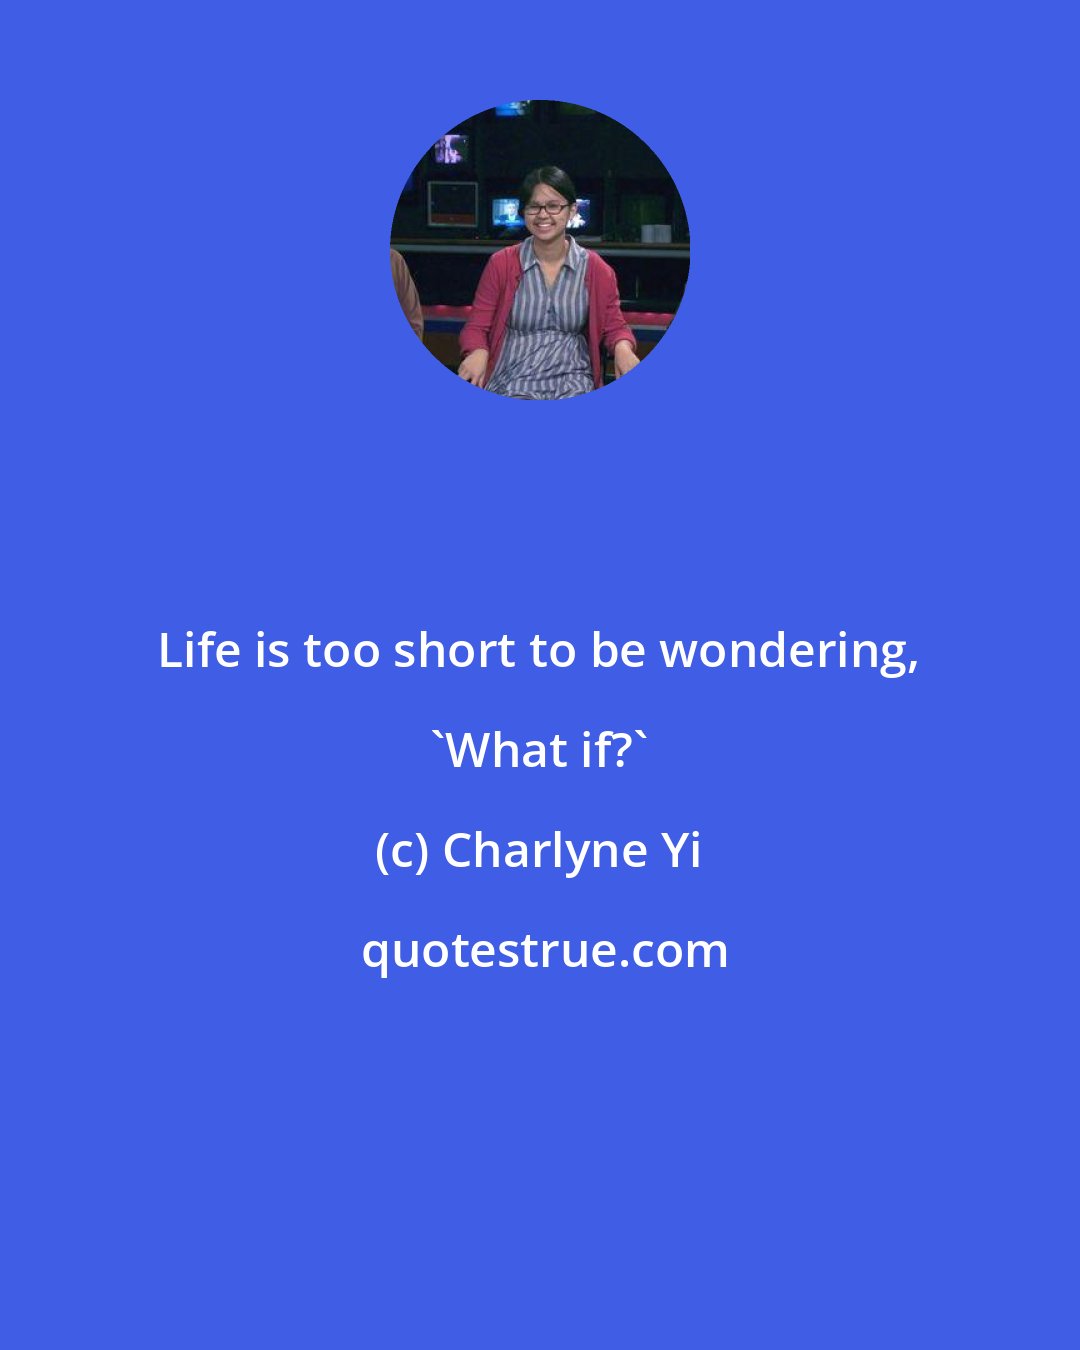 Charlyne Yi: Life is too short to be wondering, 'What if?'